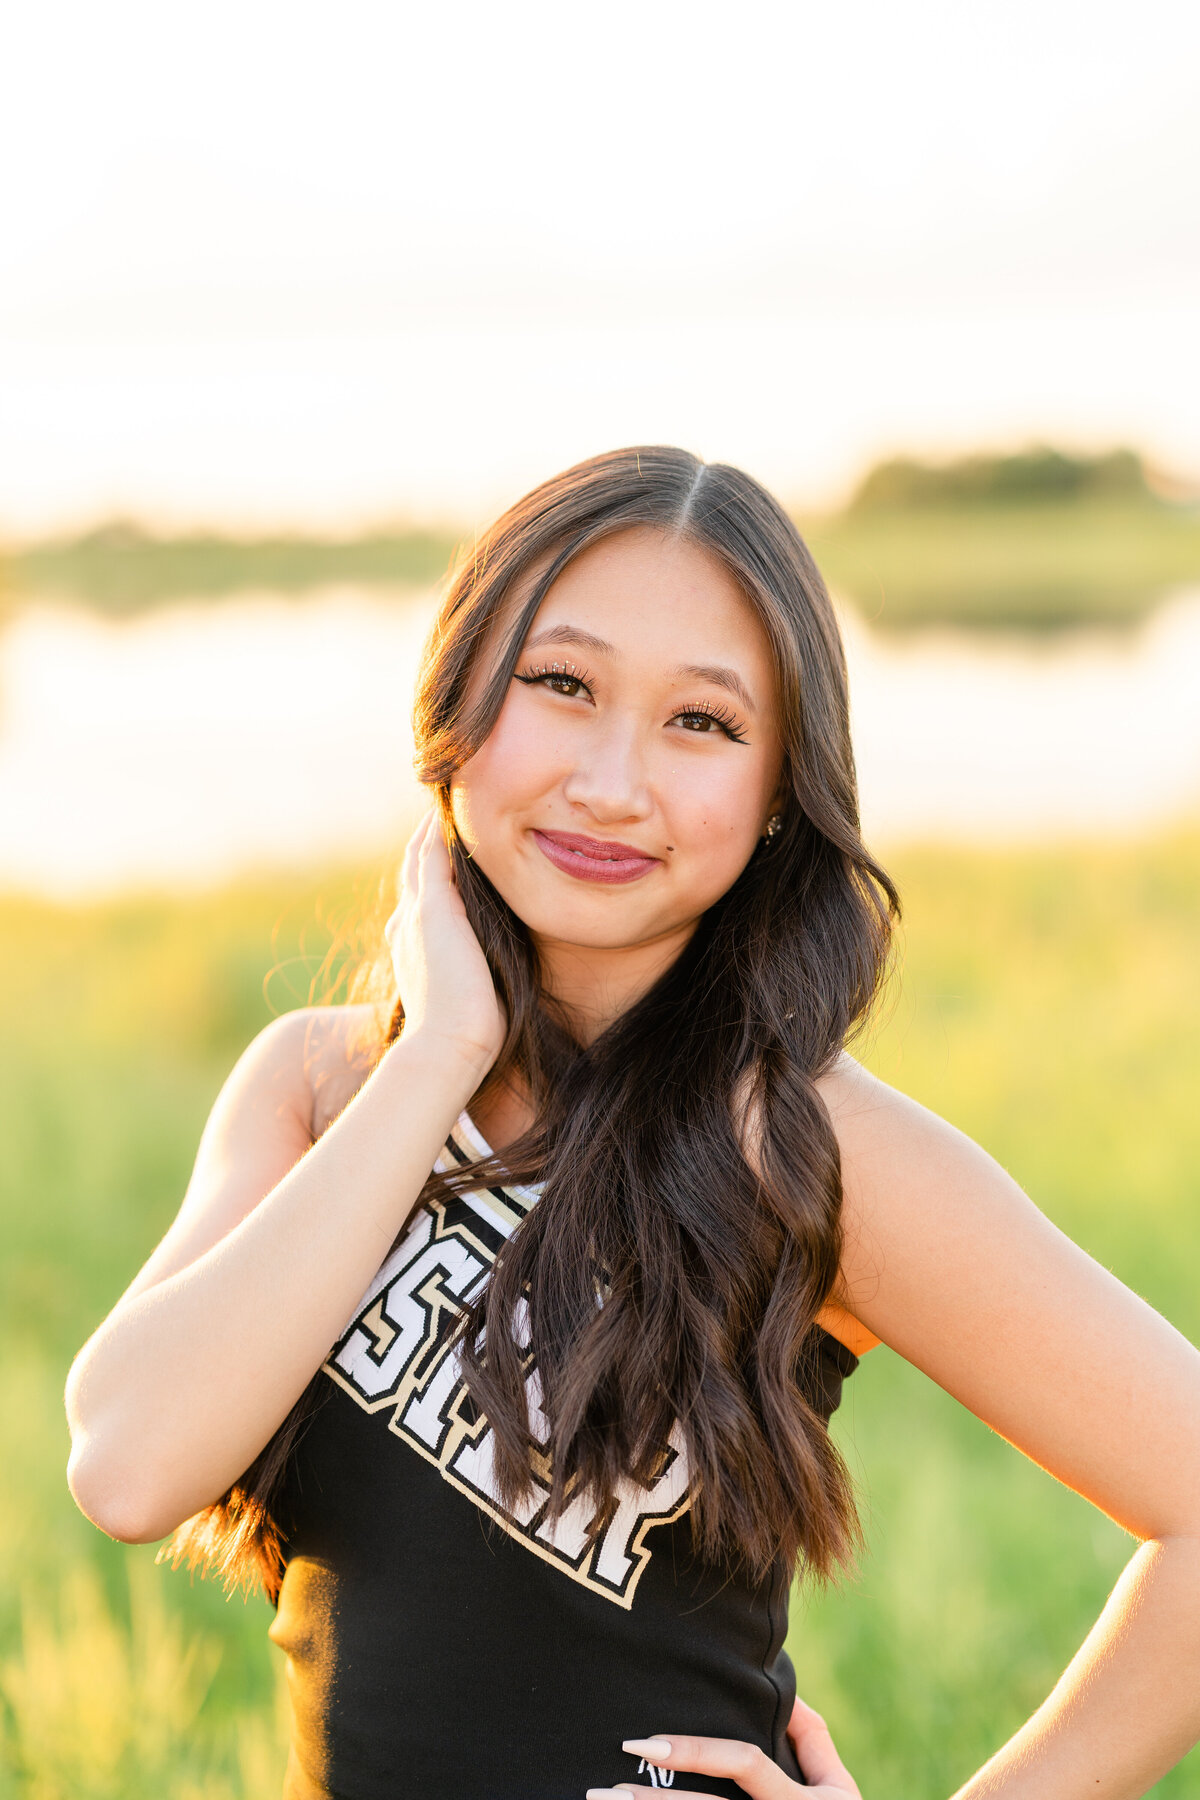 Houston high school senior girl in cheerleading outfit holding hair and smiling with hand on hip in open field with pond at golden hour in Josey Lake Park